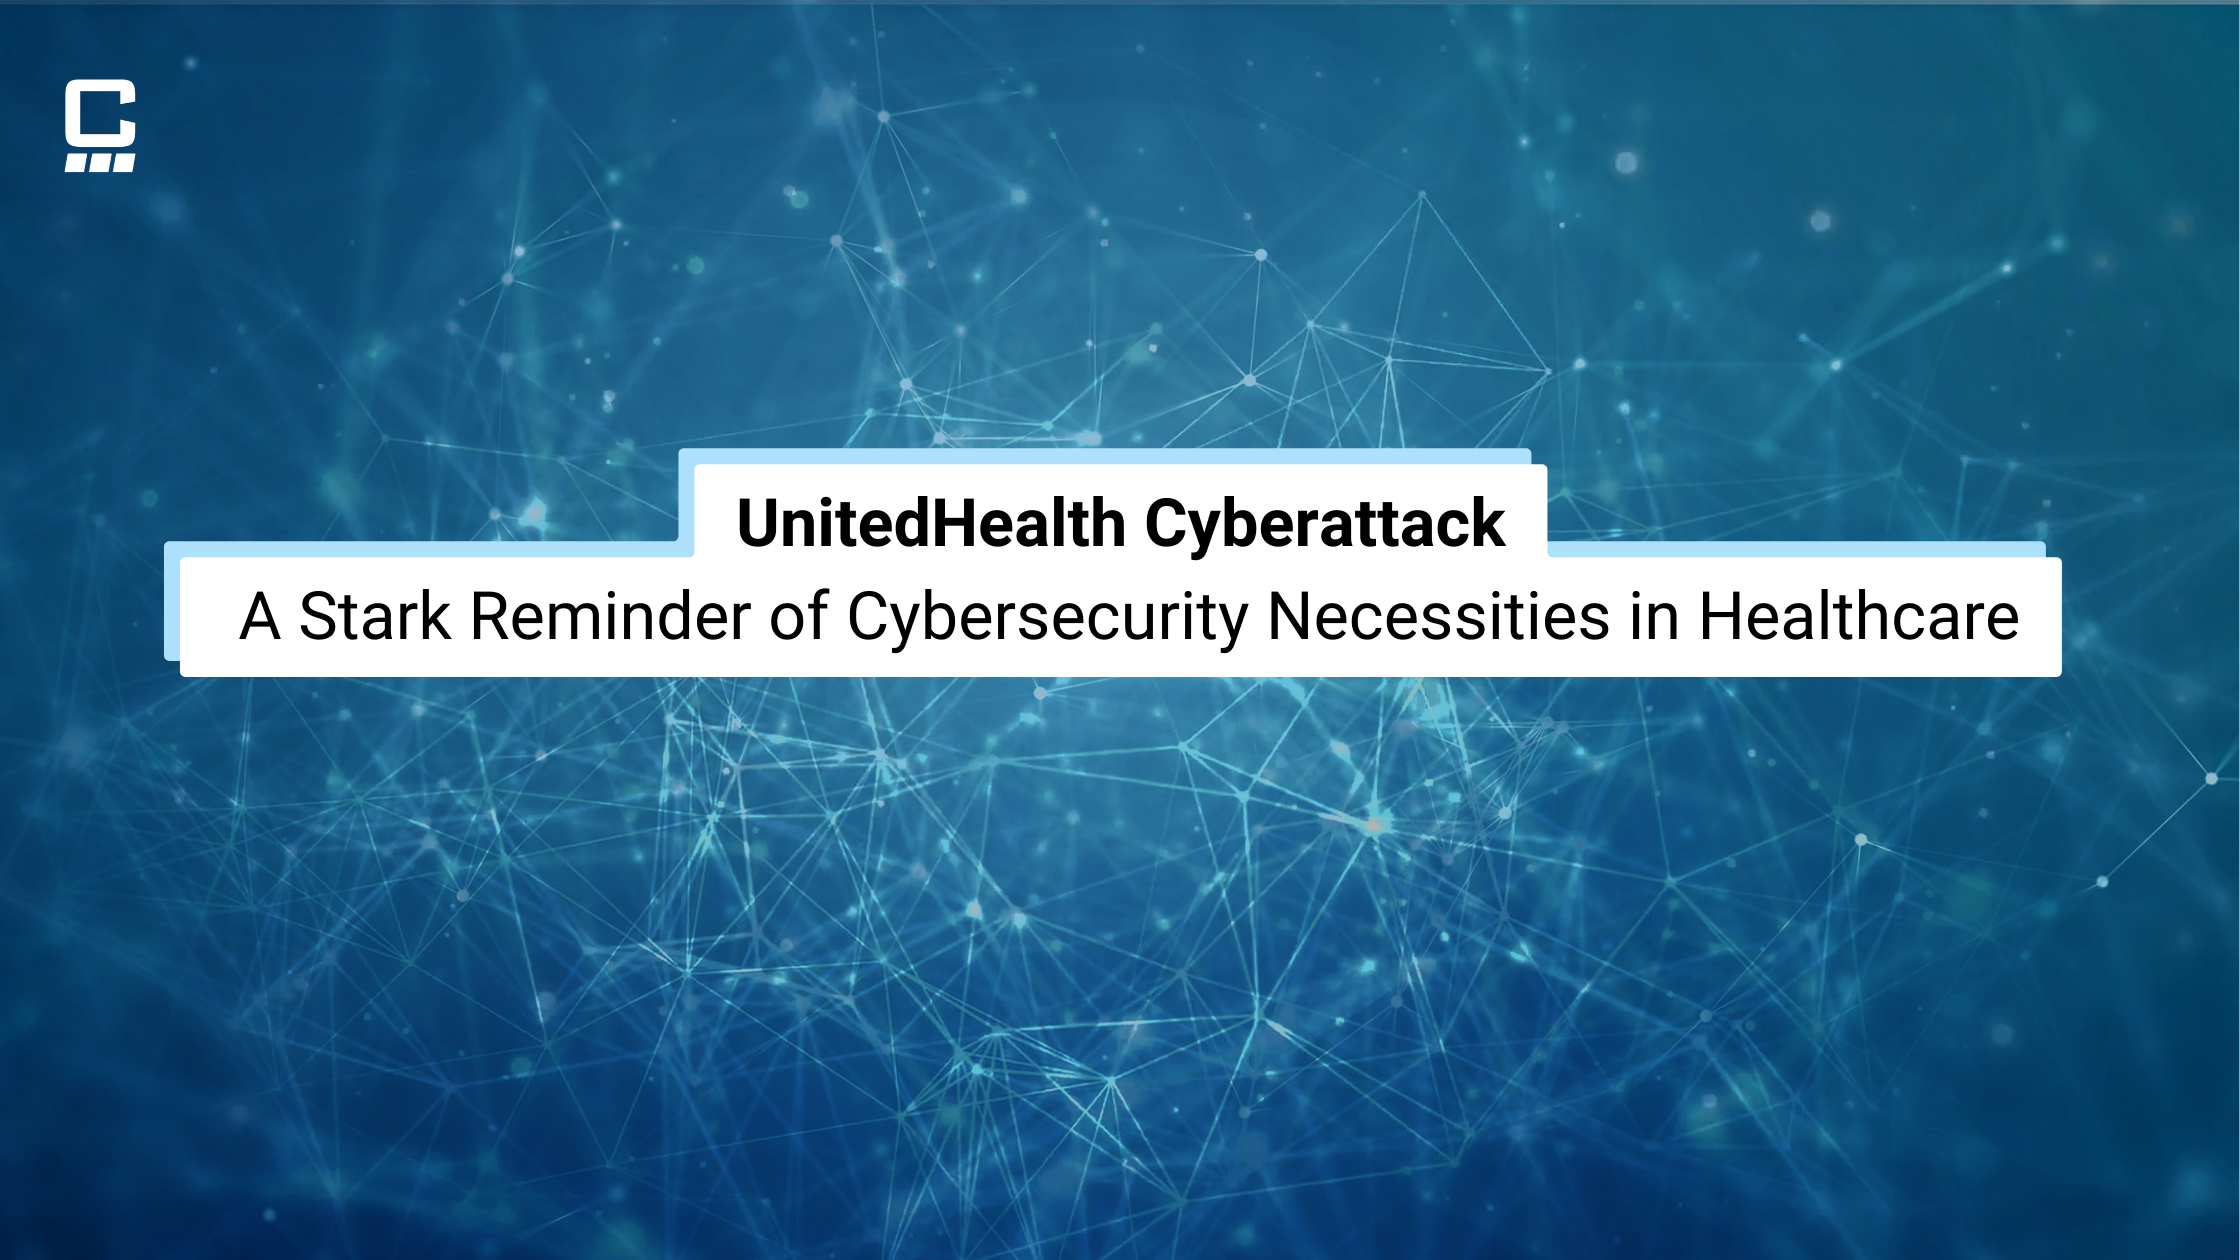 UnitedHealth Cyberattack: A Stark Reminder of Cybersecurity Necessities in Healthcare